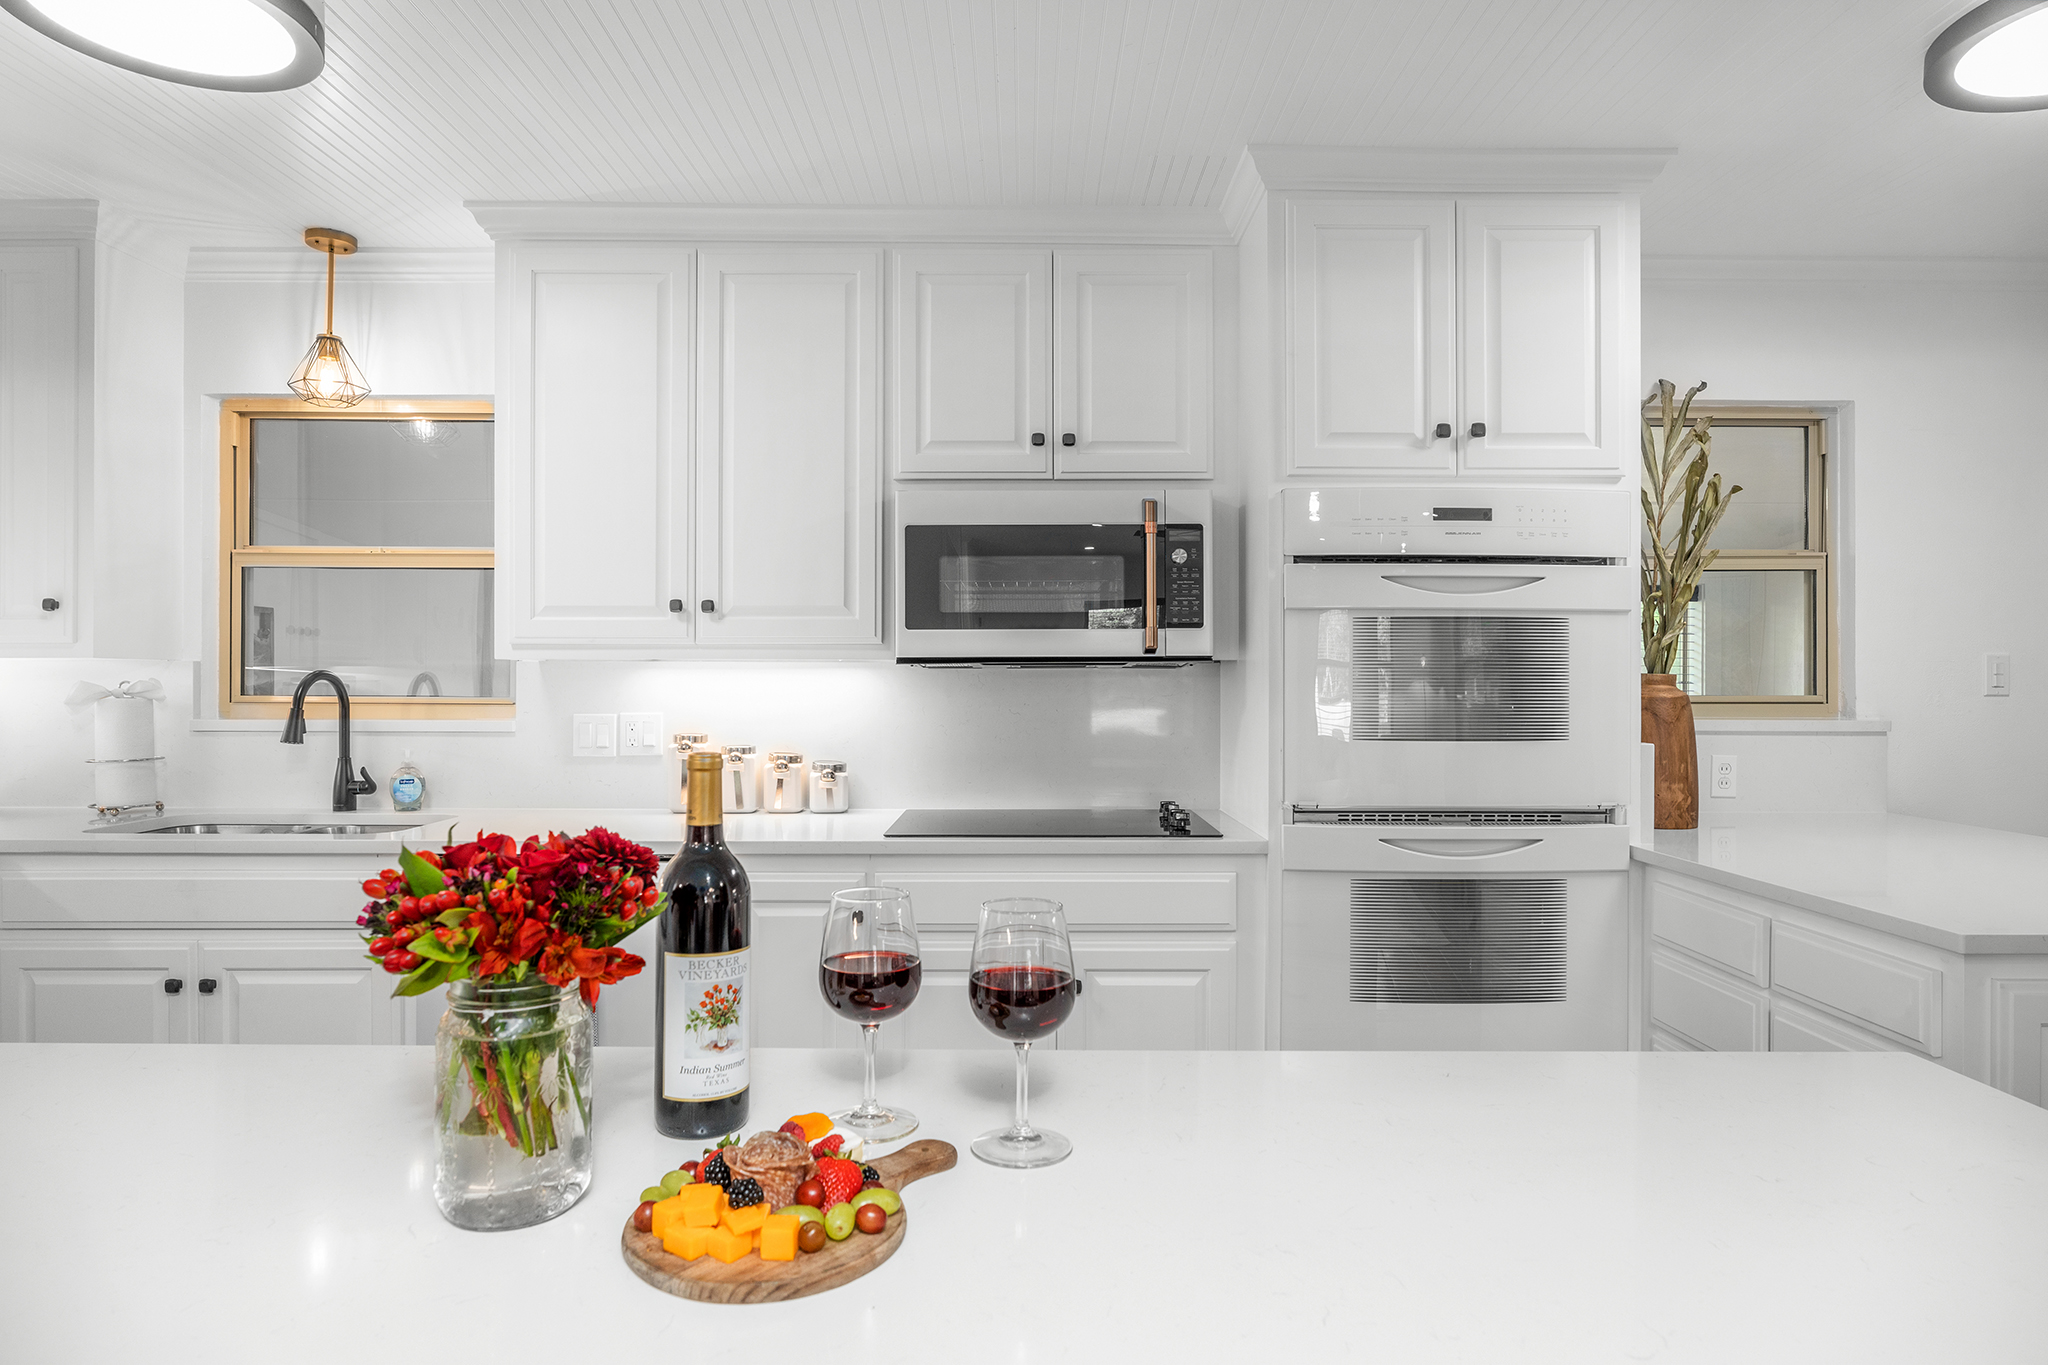 Gather in style and create delicious memories in our inviting white kitchen with a large island - the ideal spot to pair your favorite bottle of wine with delectable local cheeses.